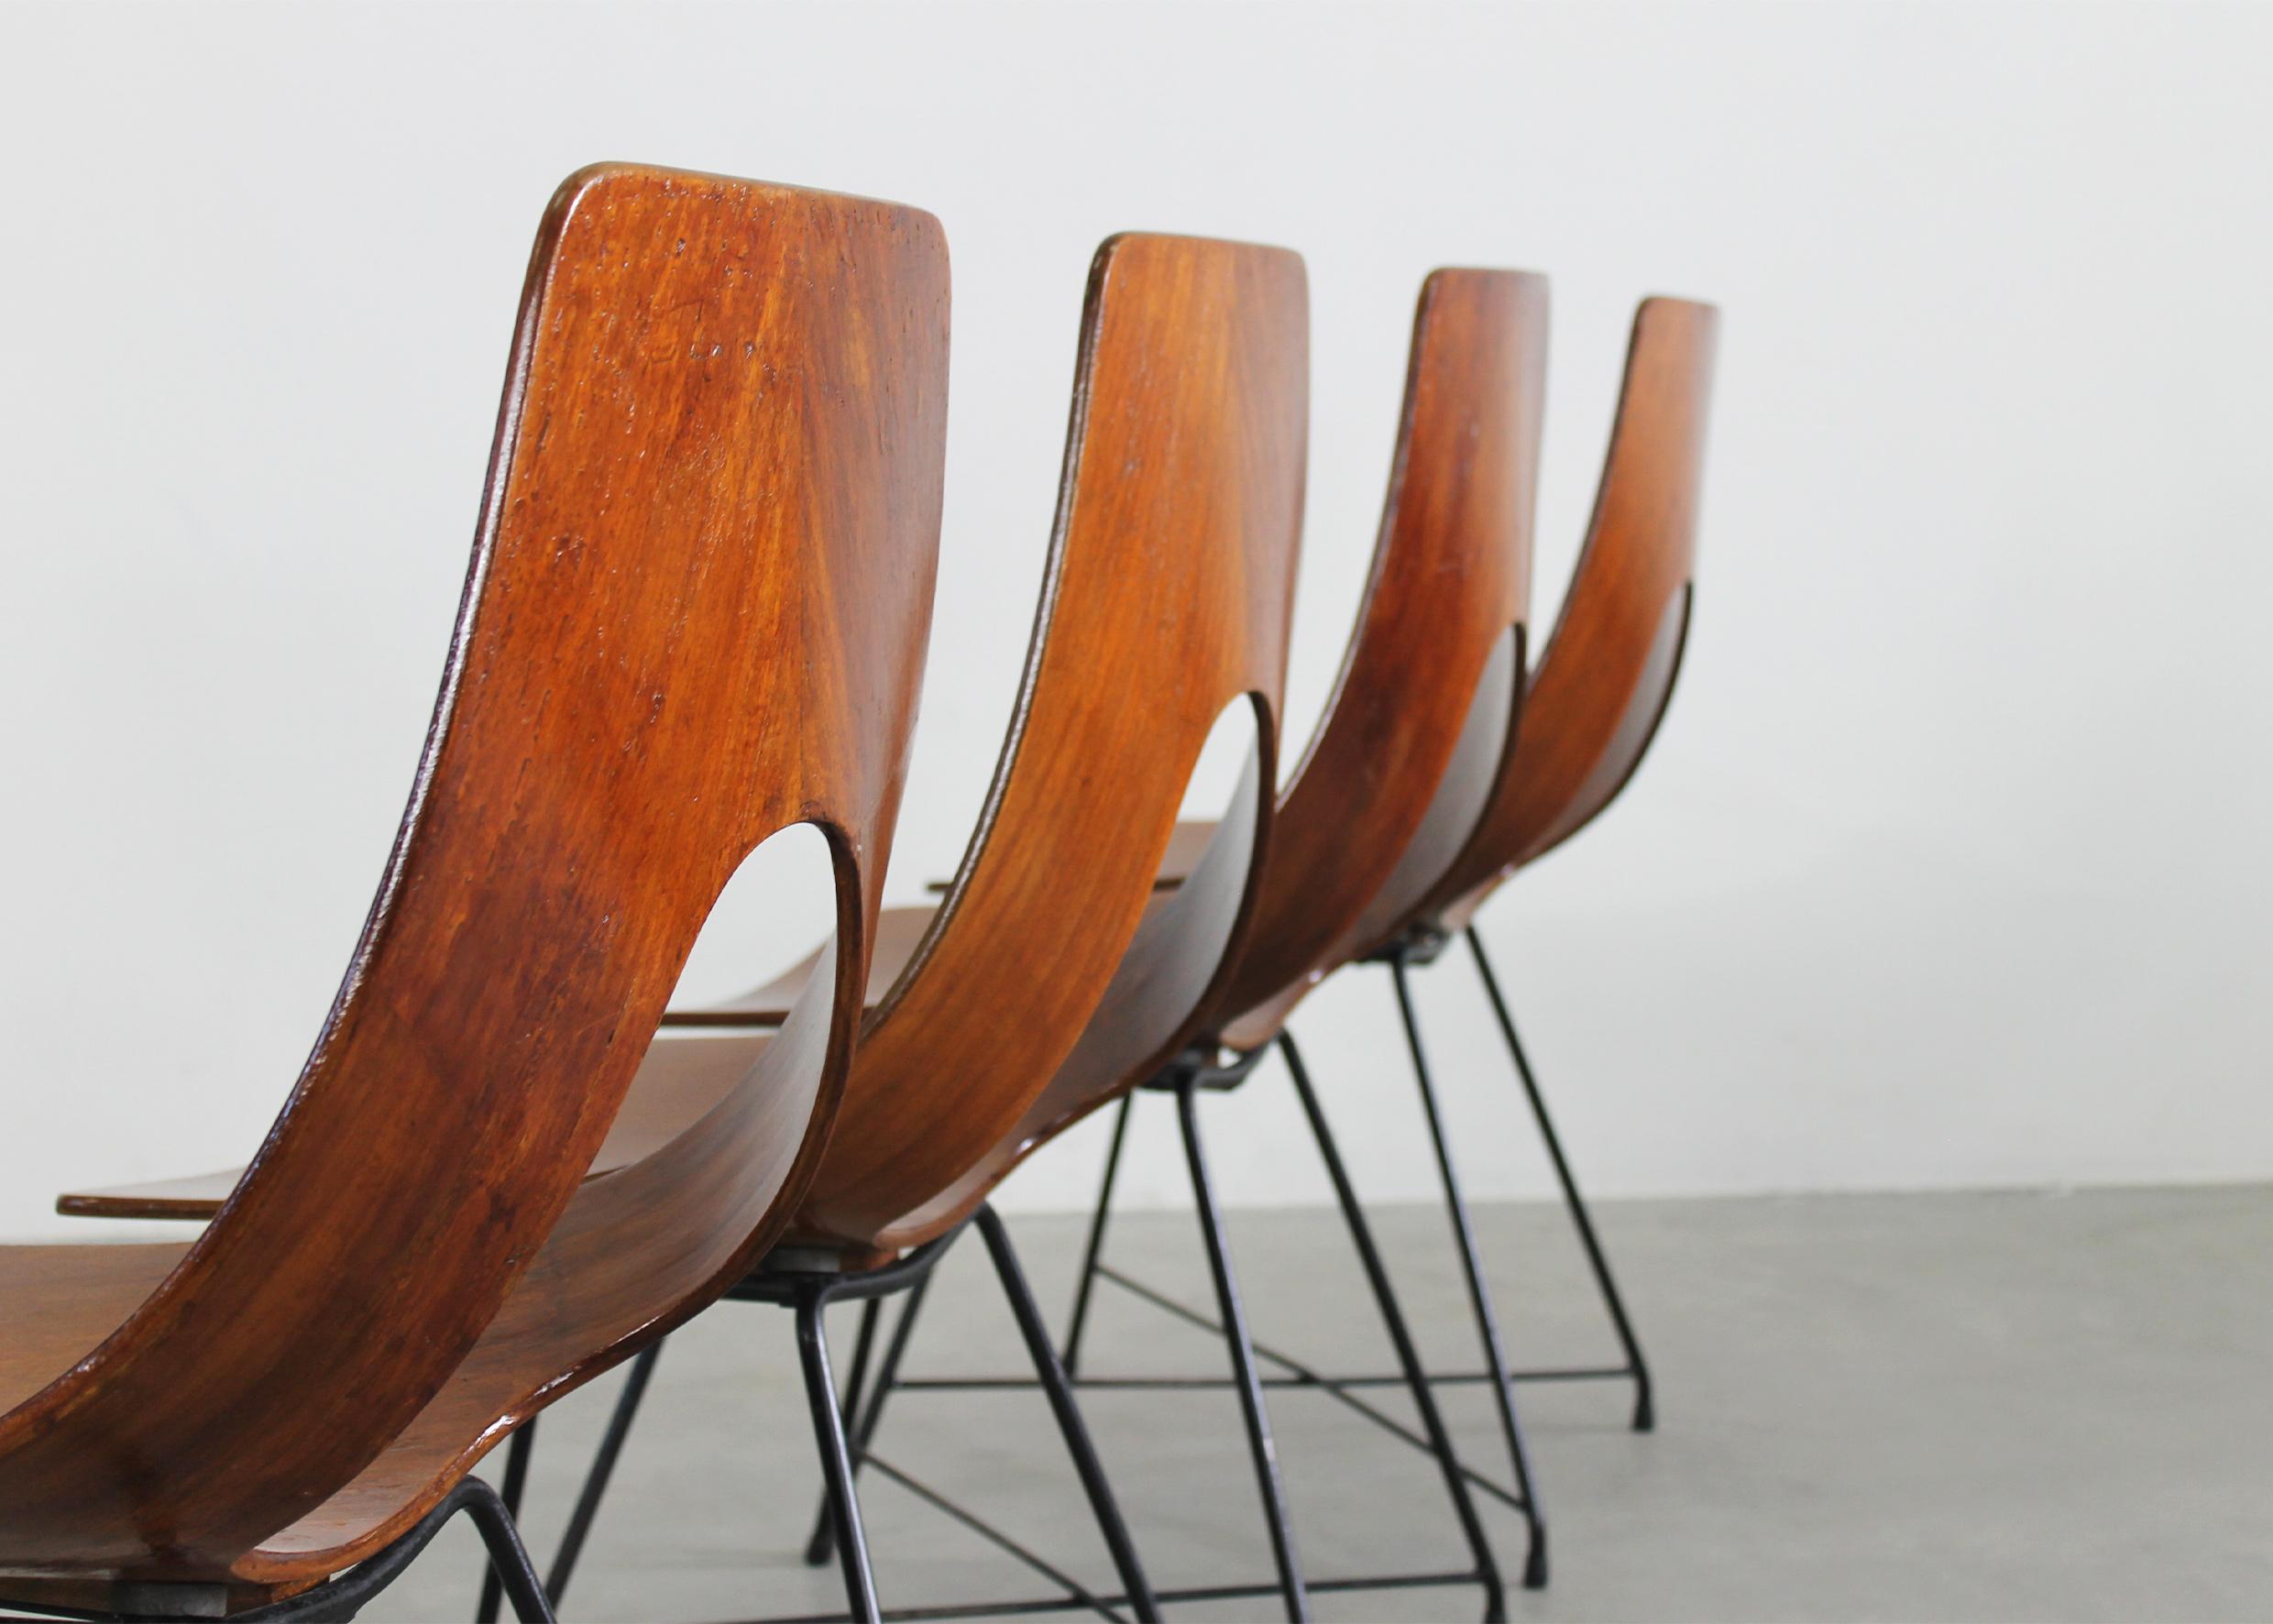 Italian Augusto Bozzi Set of Four Ariston Chairs in Plywood and Metal by Saporiti 1950s For Sale